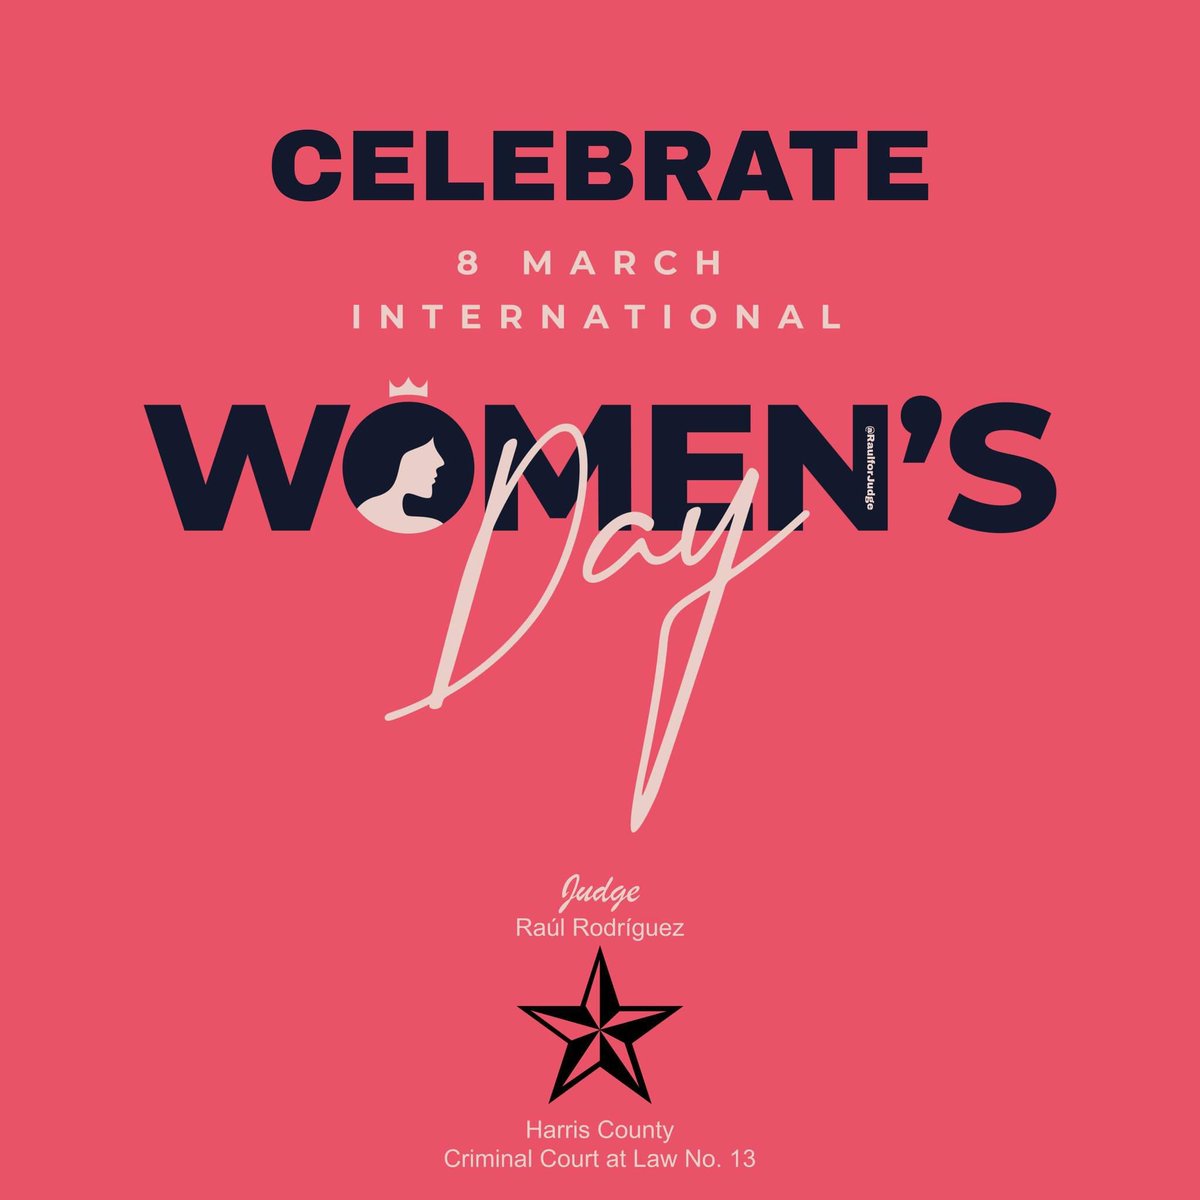 Happy International Women's Day! Embrace and celebrate the #women in your life.